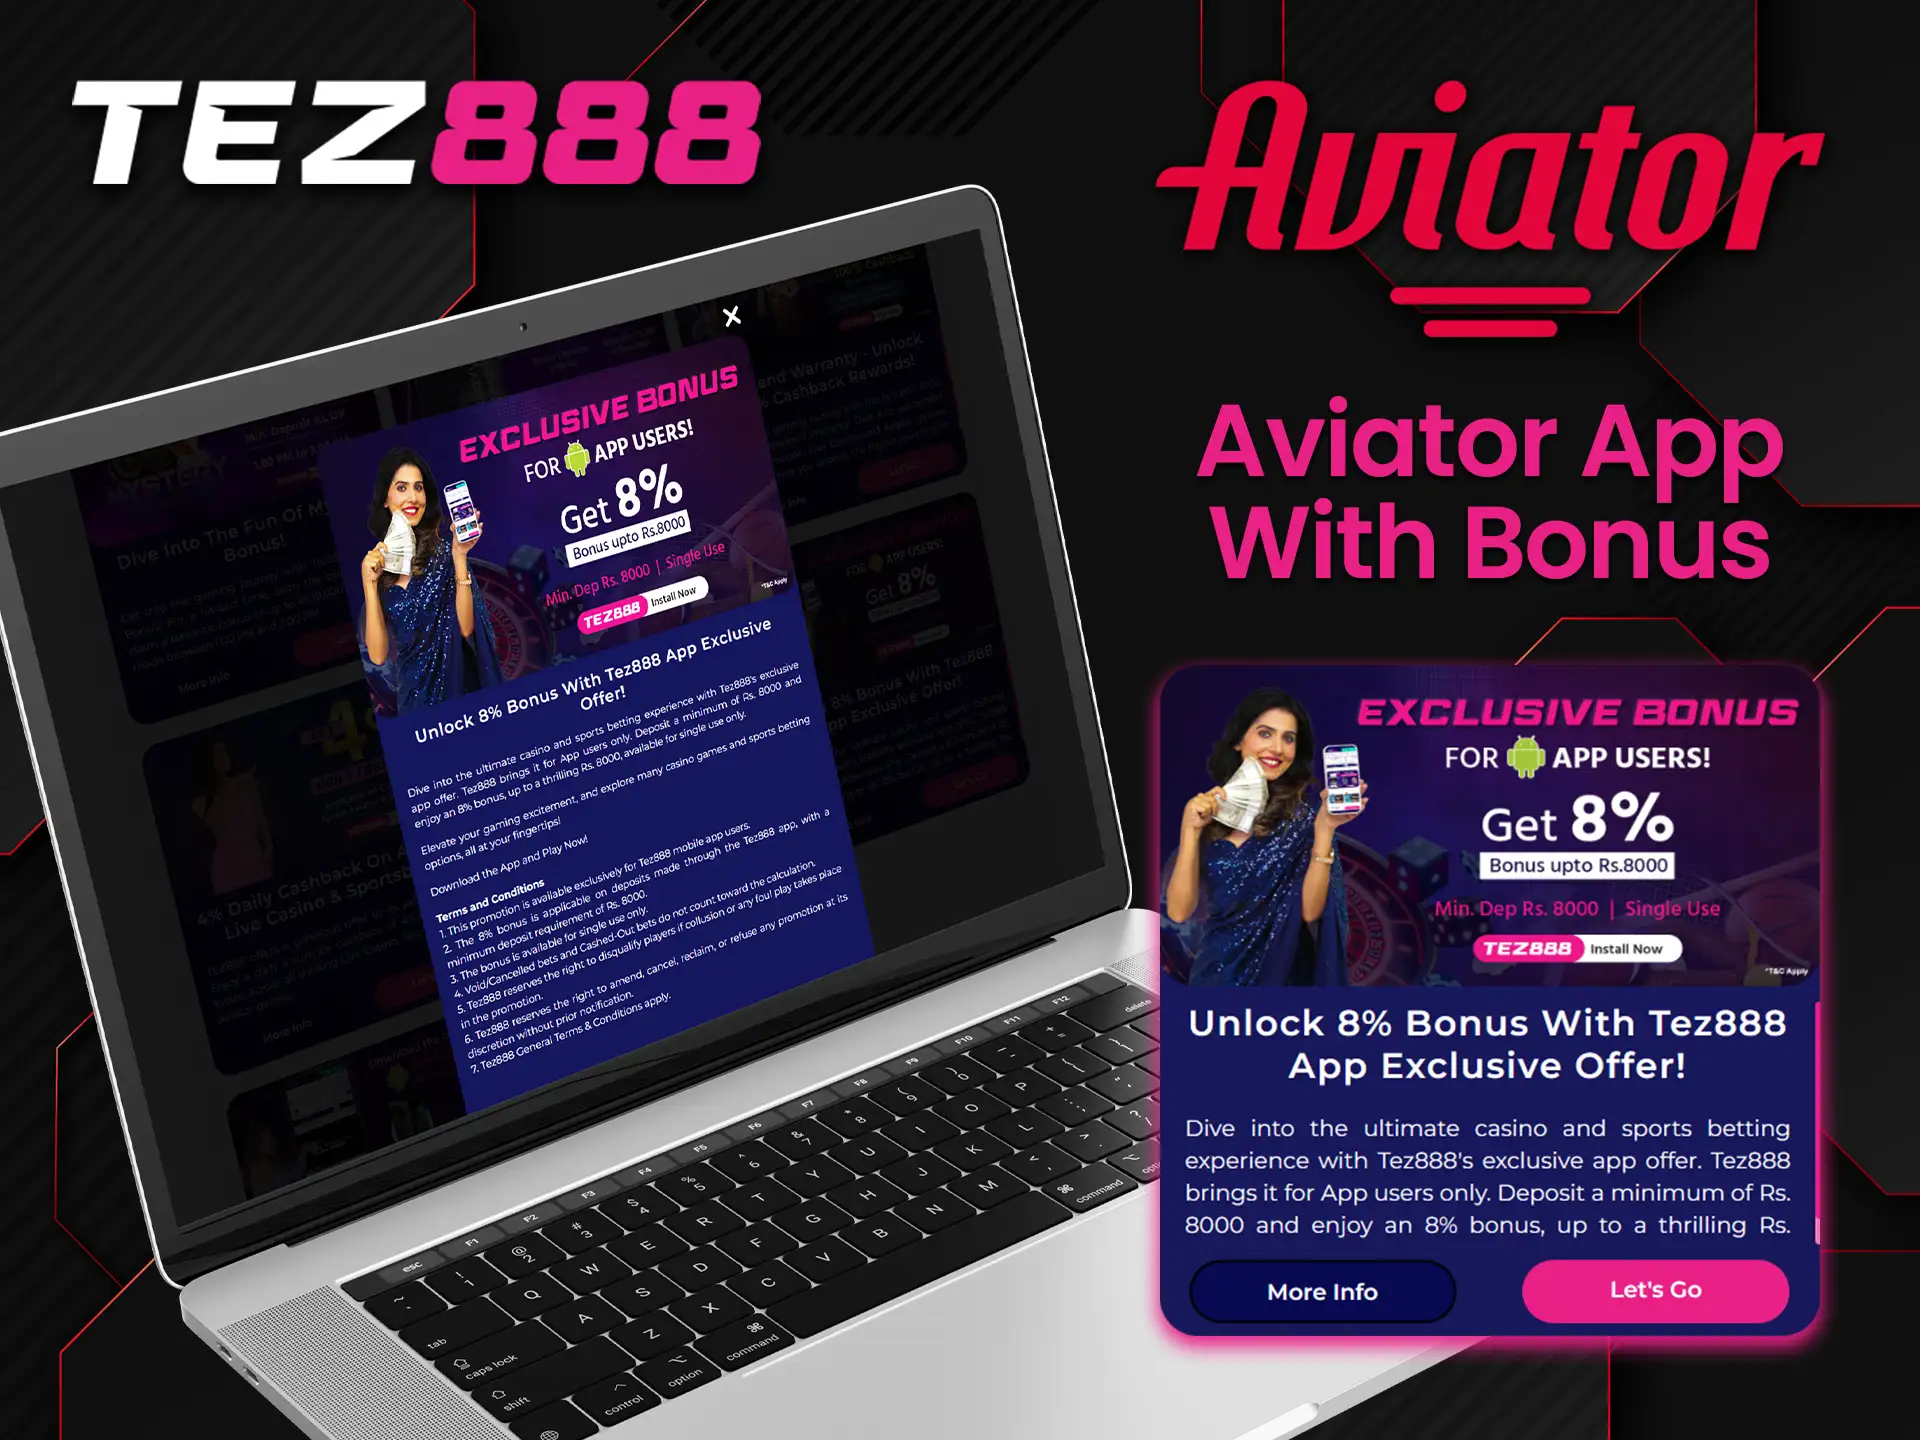 Download the Tez888 mobile app and take advantage of the bonus to play Aviator.